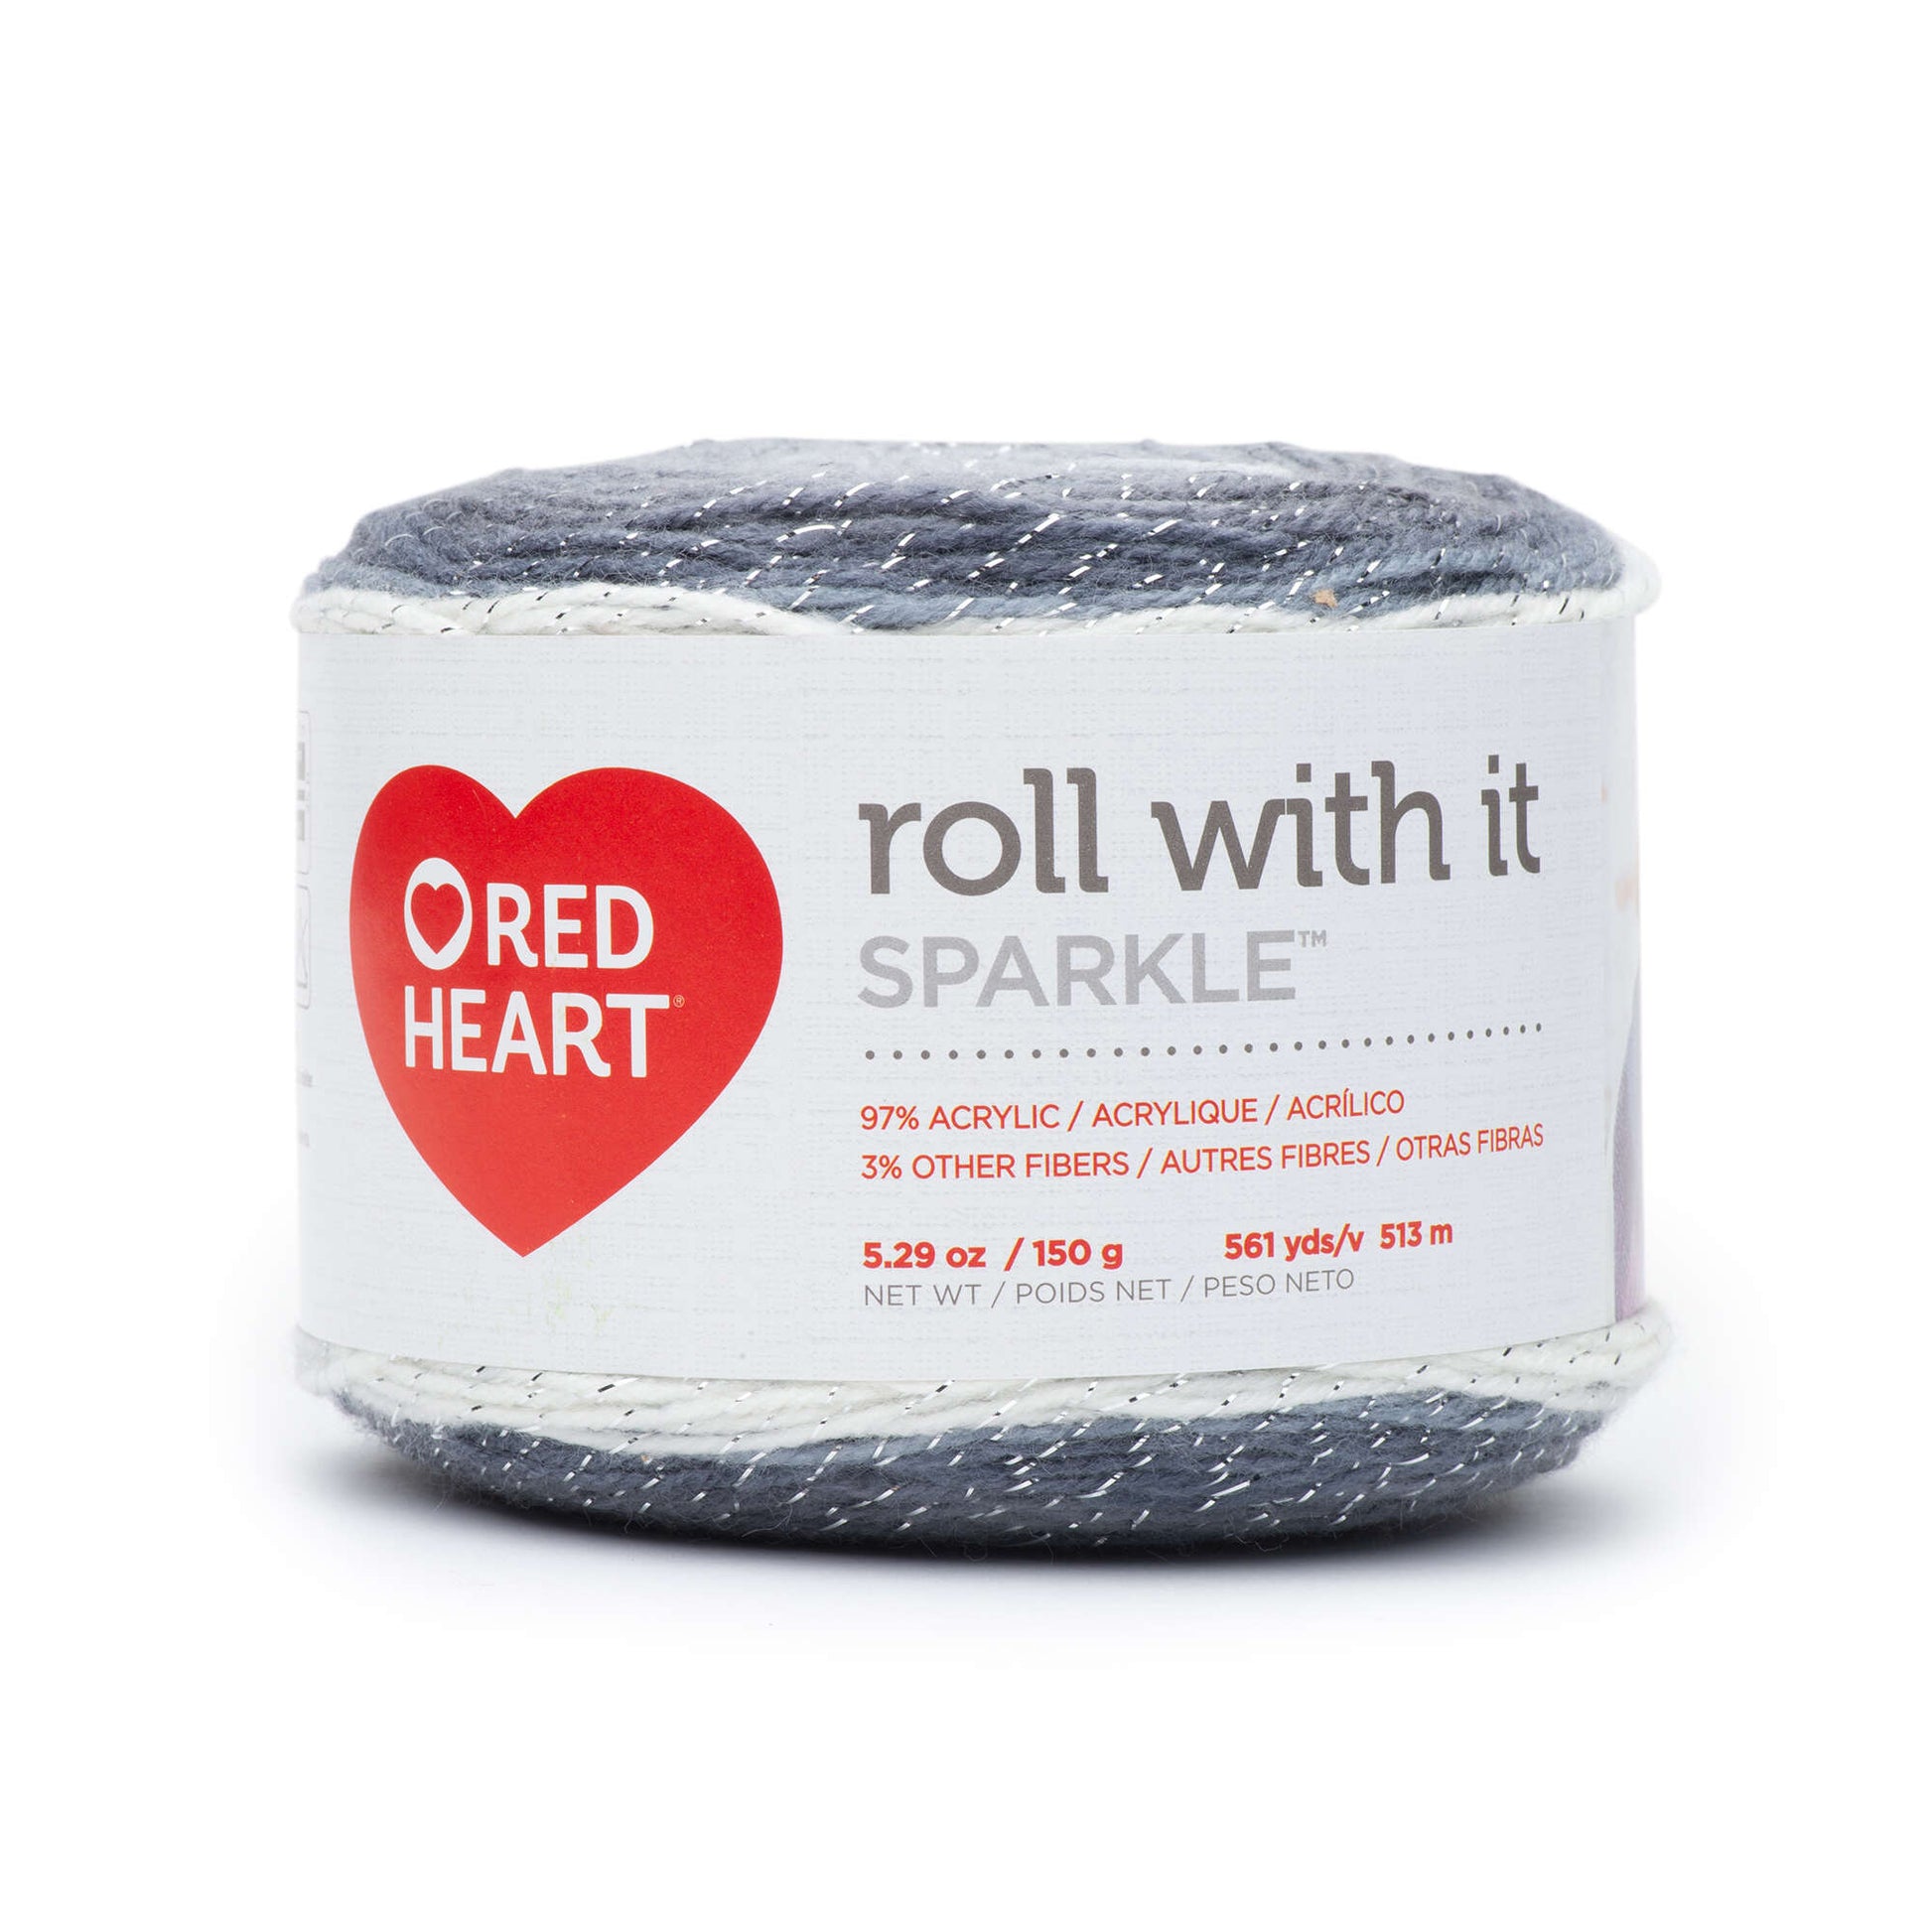 Red Heart Roll With It Sparkle Yarn